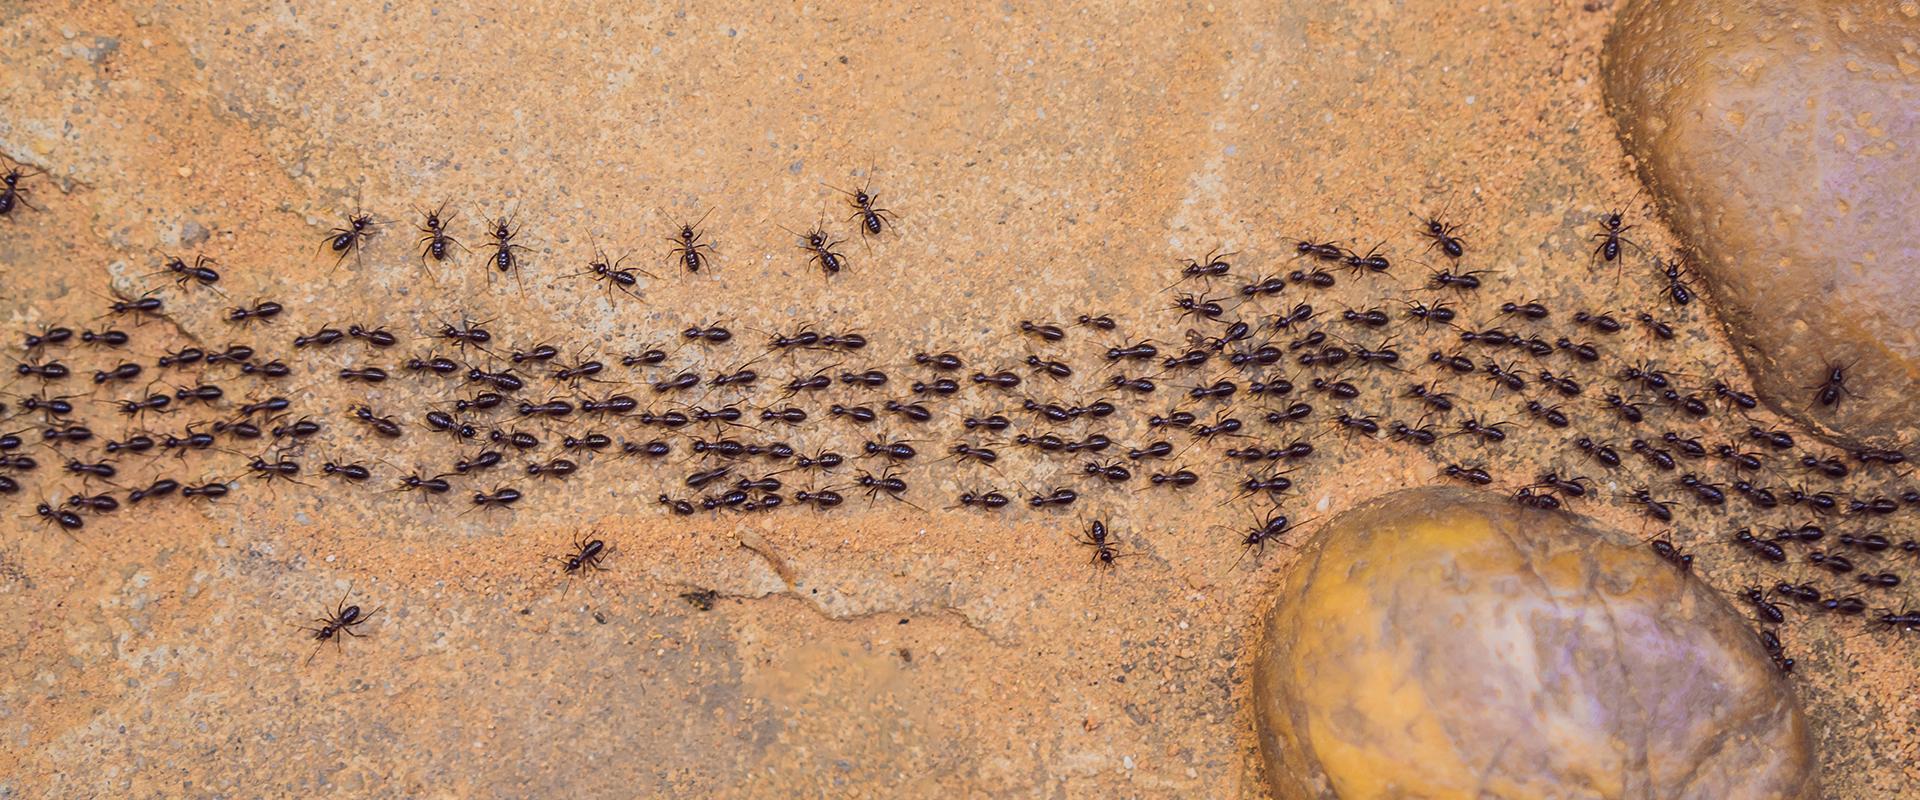 ants marching in the dirt in meridian idaho